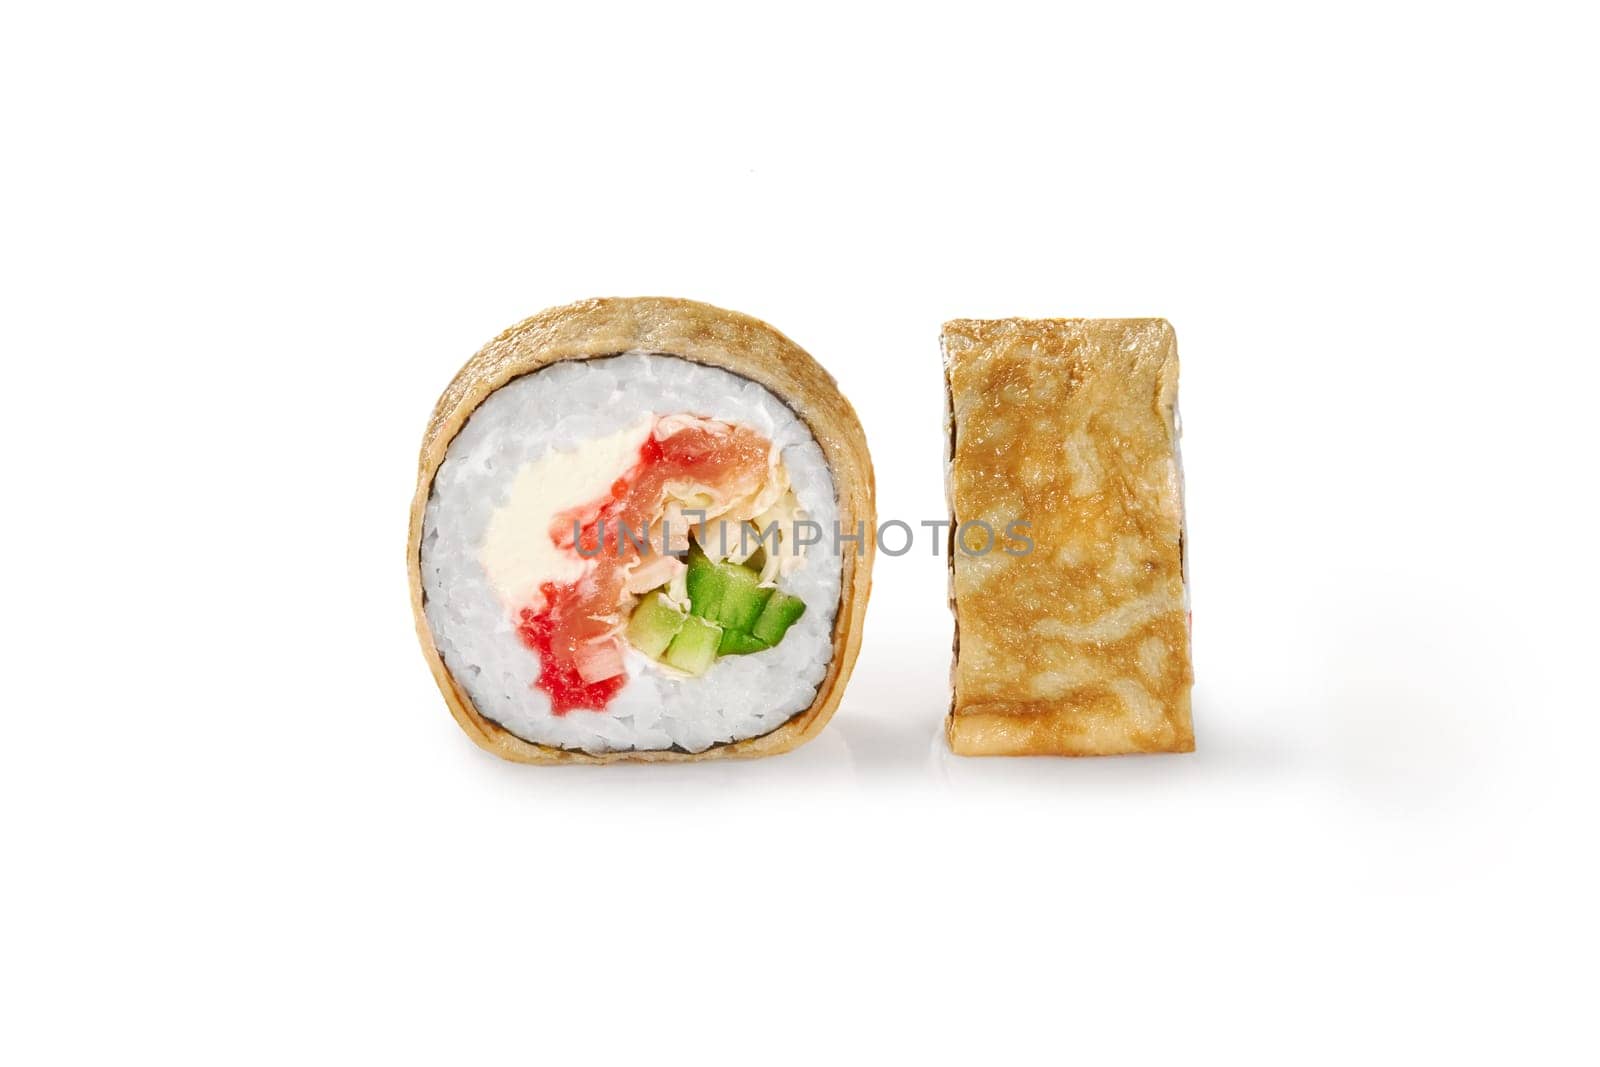 Delicious crepe sushi roll filled with salmon, tobiko roe, fresh cucumber and napa cabbage, closeup view isolated on white background